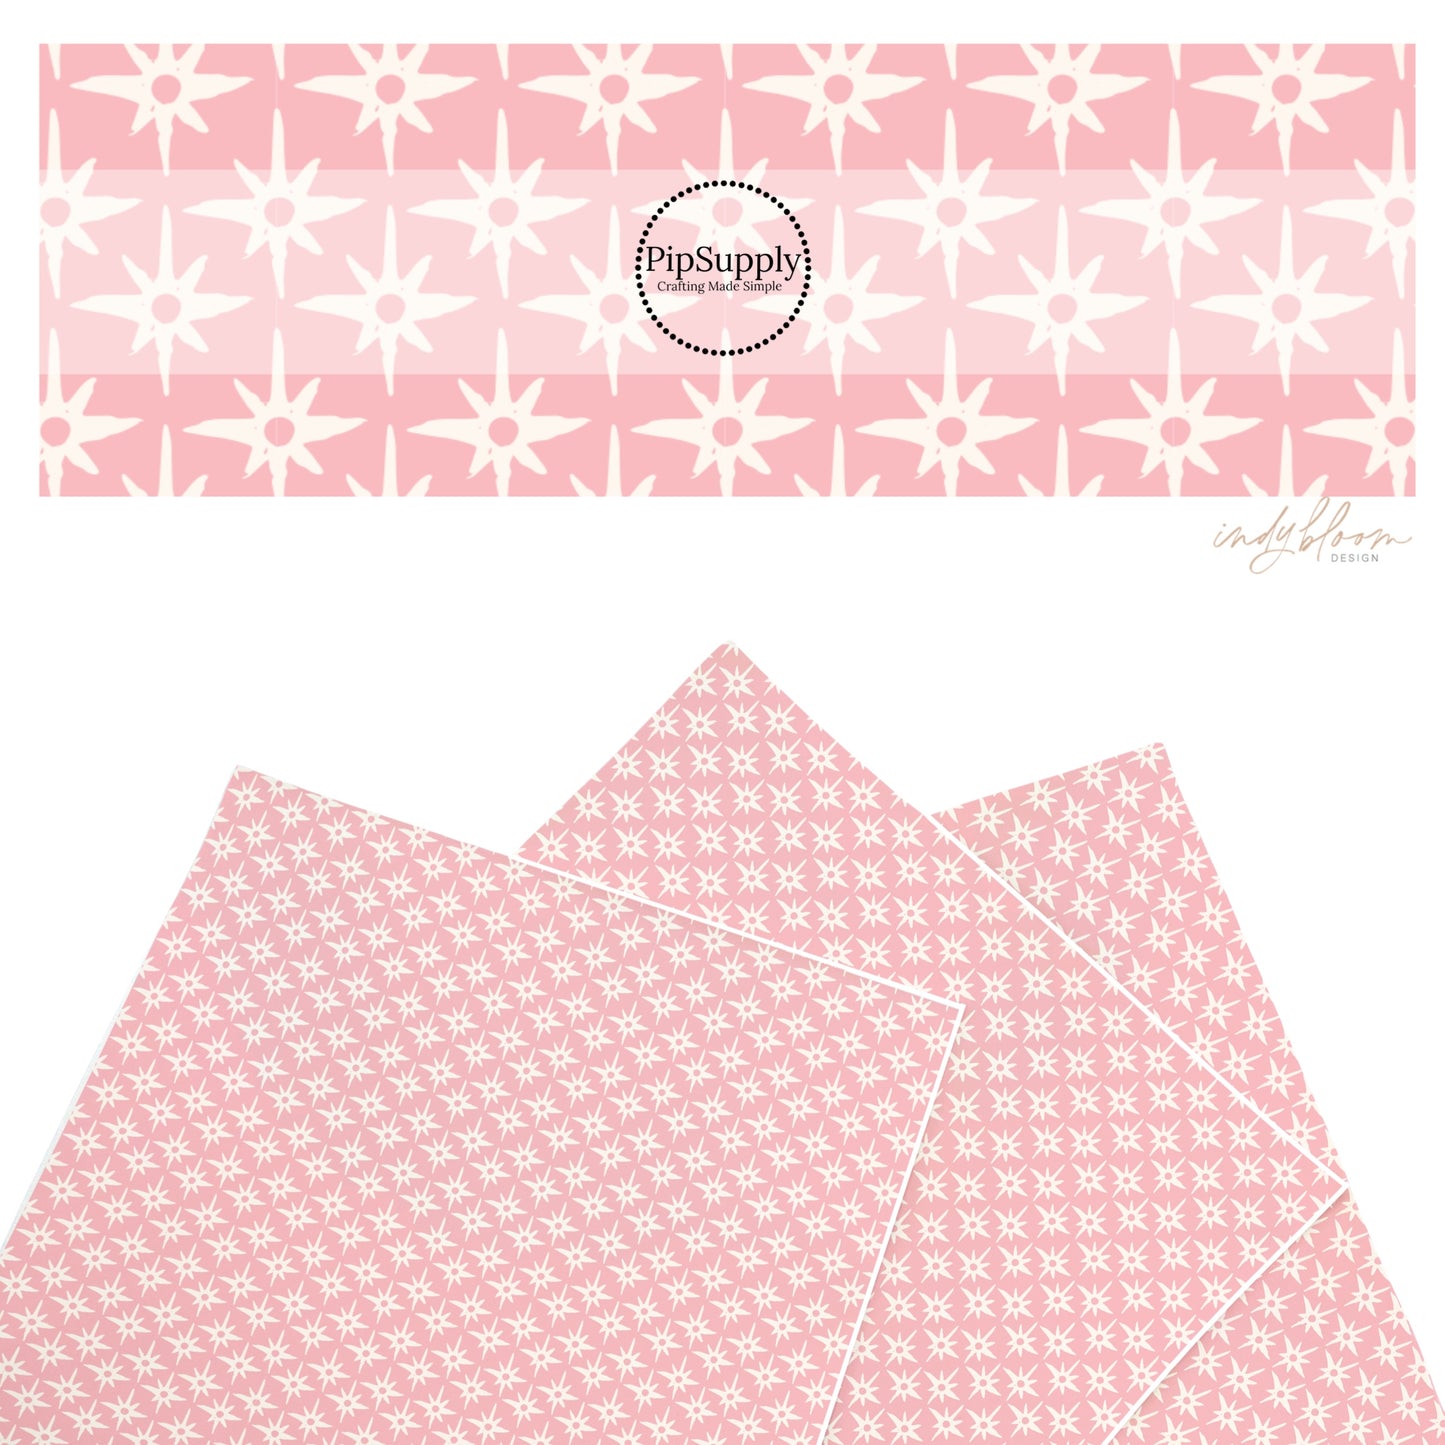 These summer faux leather sheets contain the following design elements: compass star pattern on pink. Our CPSIA compliant faux leather sheets or rolls can be used for all types of crafting projects.